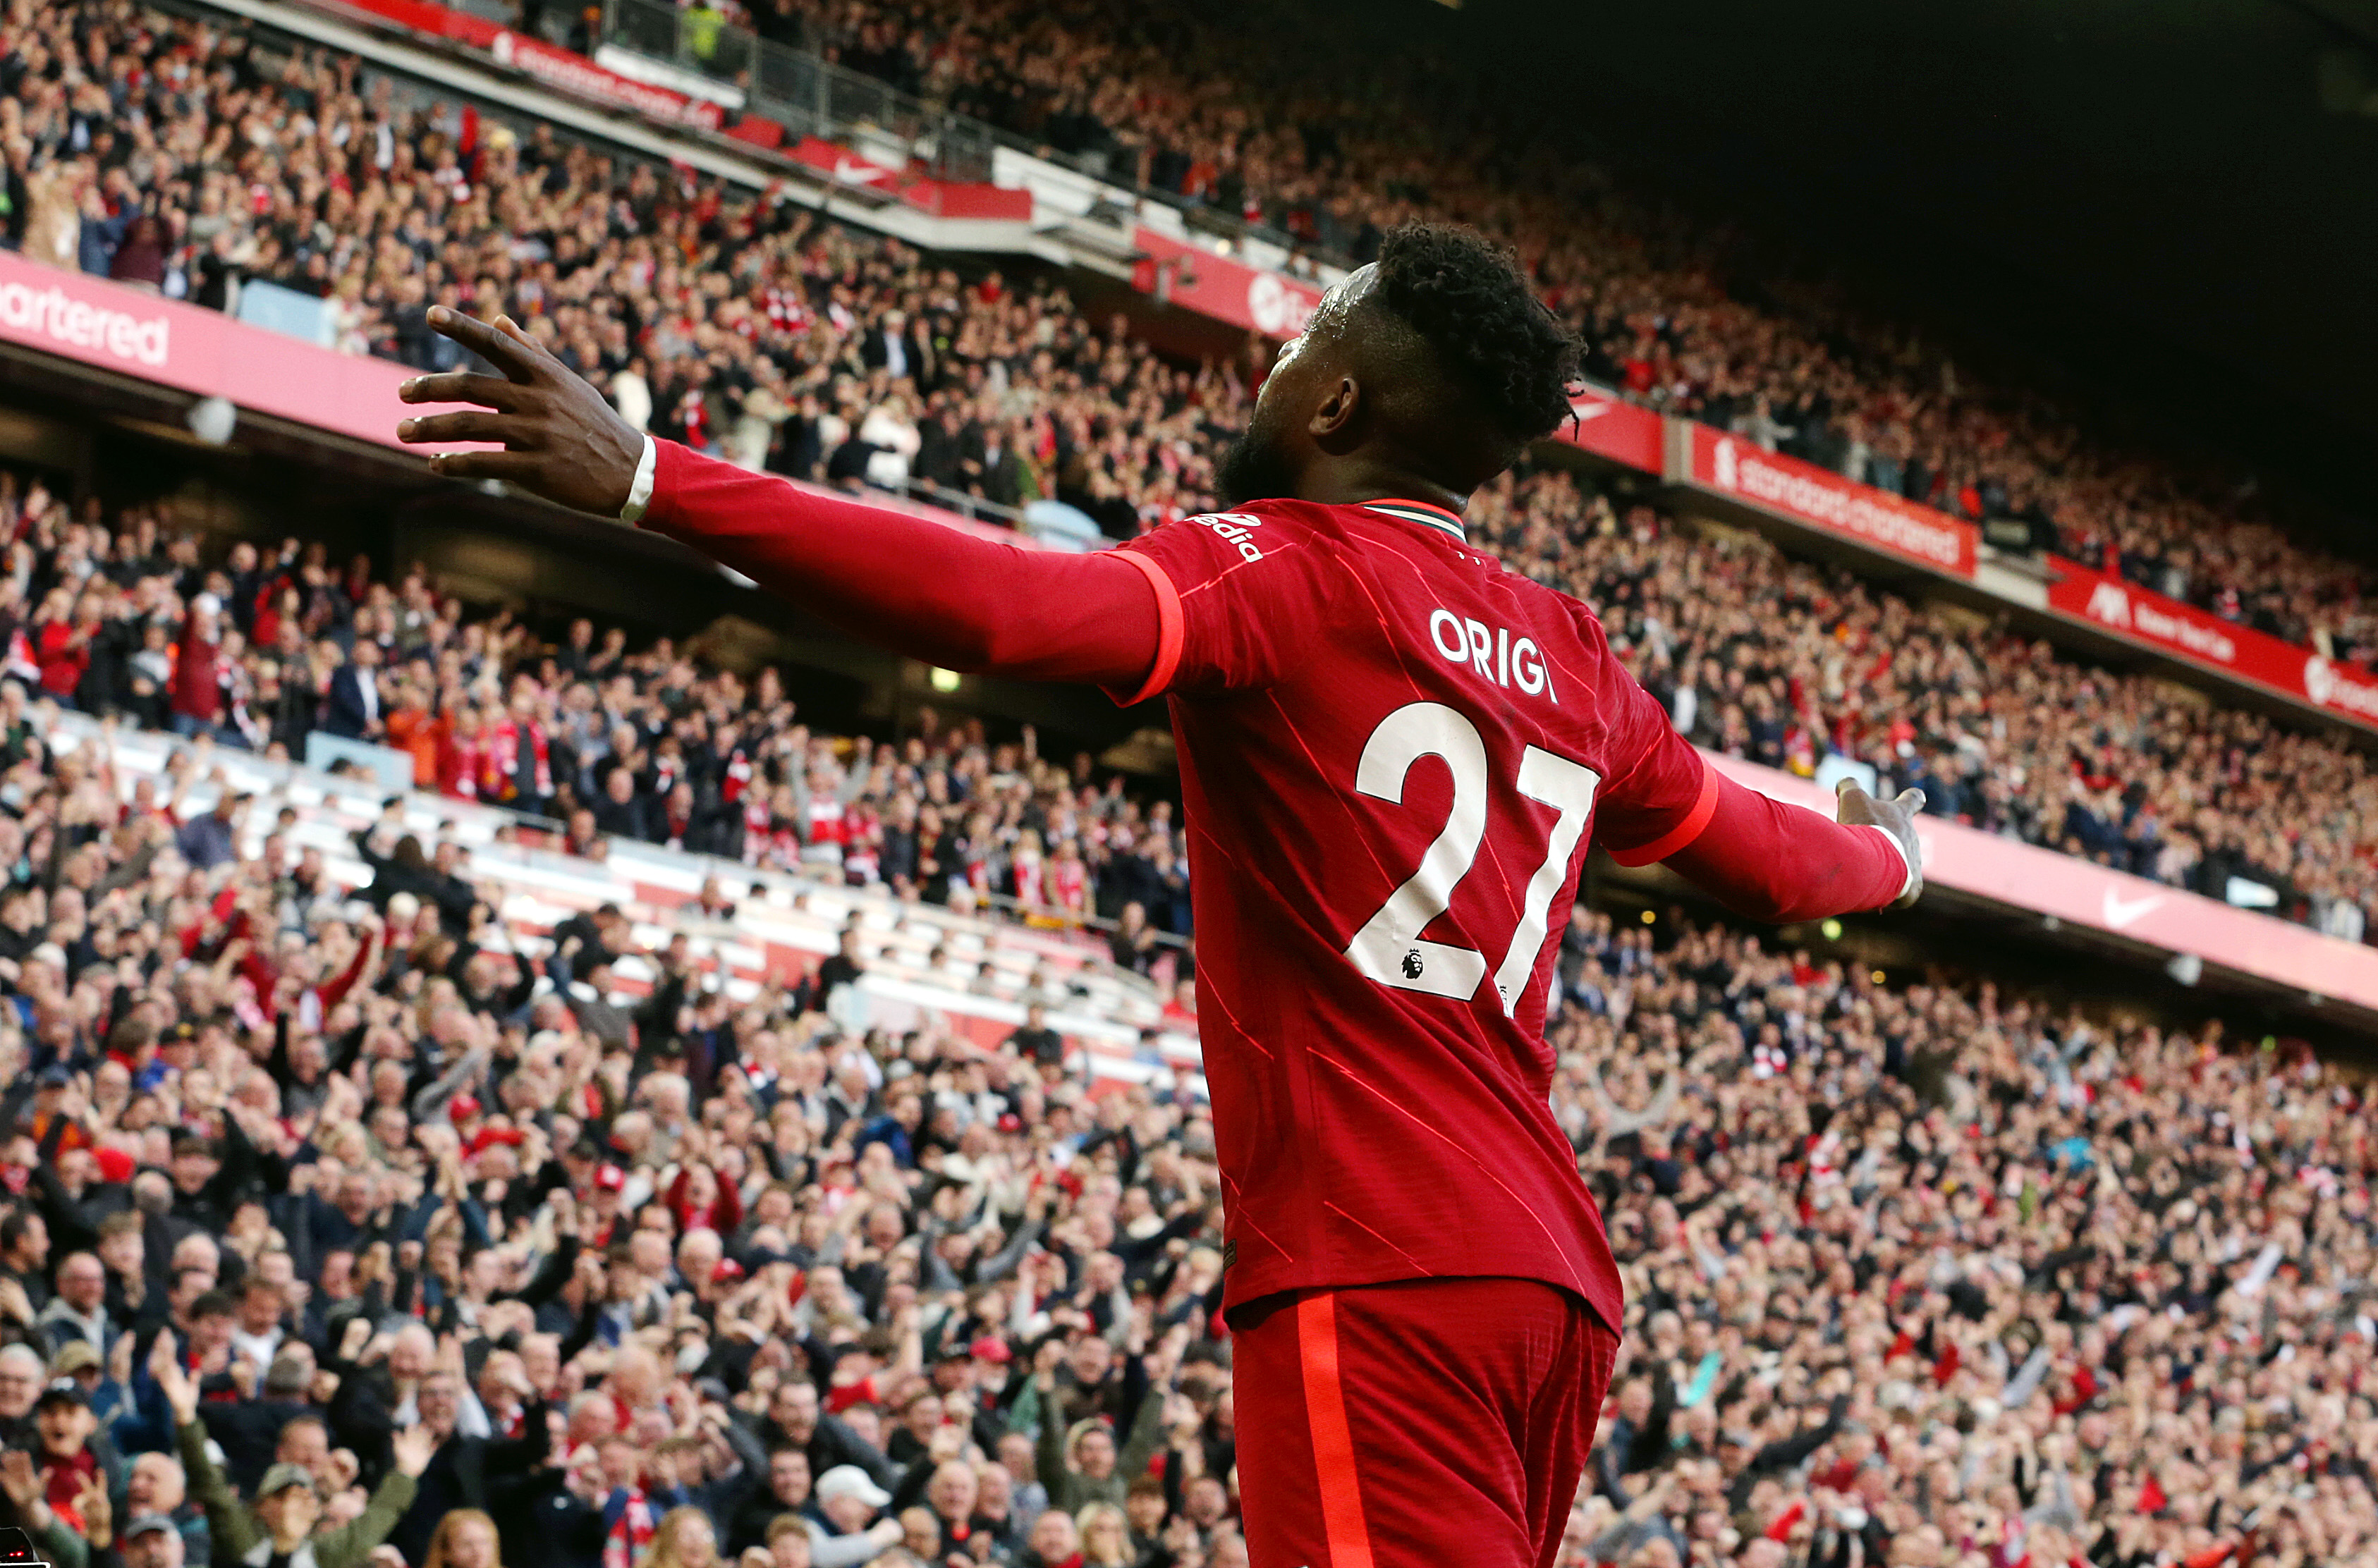 Liverpool’s Divock Origi celebrates scoring his side’s second goal during the Premier League match between Liverpool and Everton at Anfield on April 24, 2022 in Liverpool, United Kingdom.